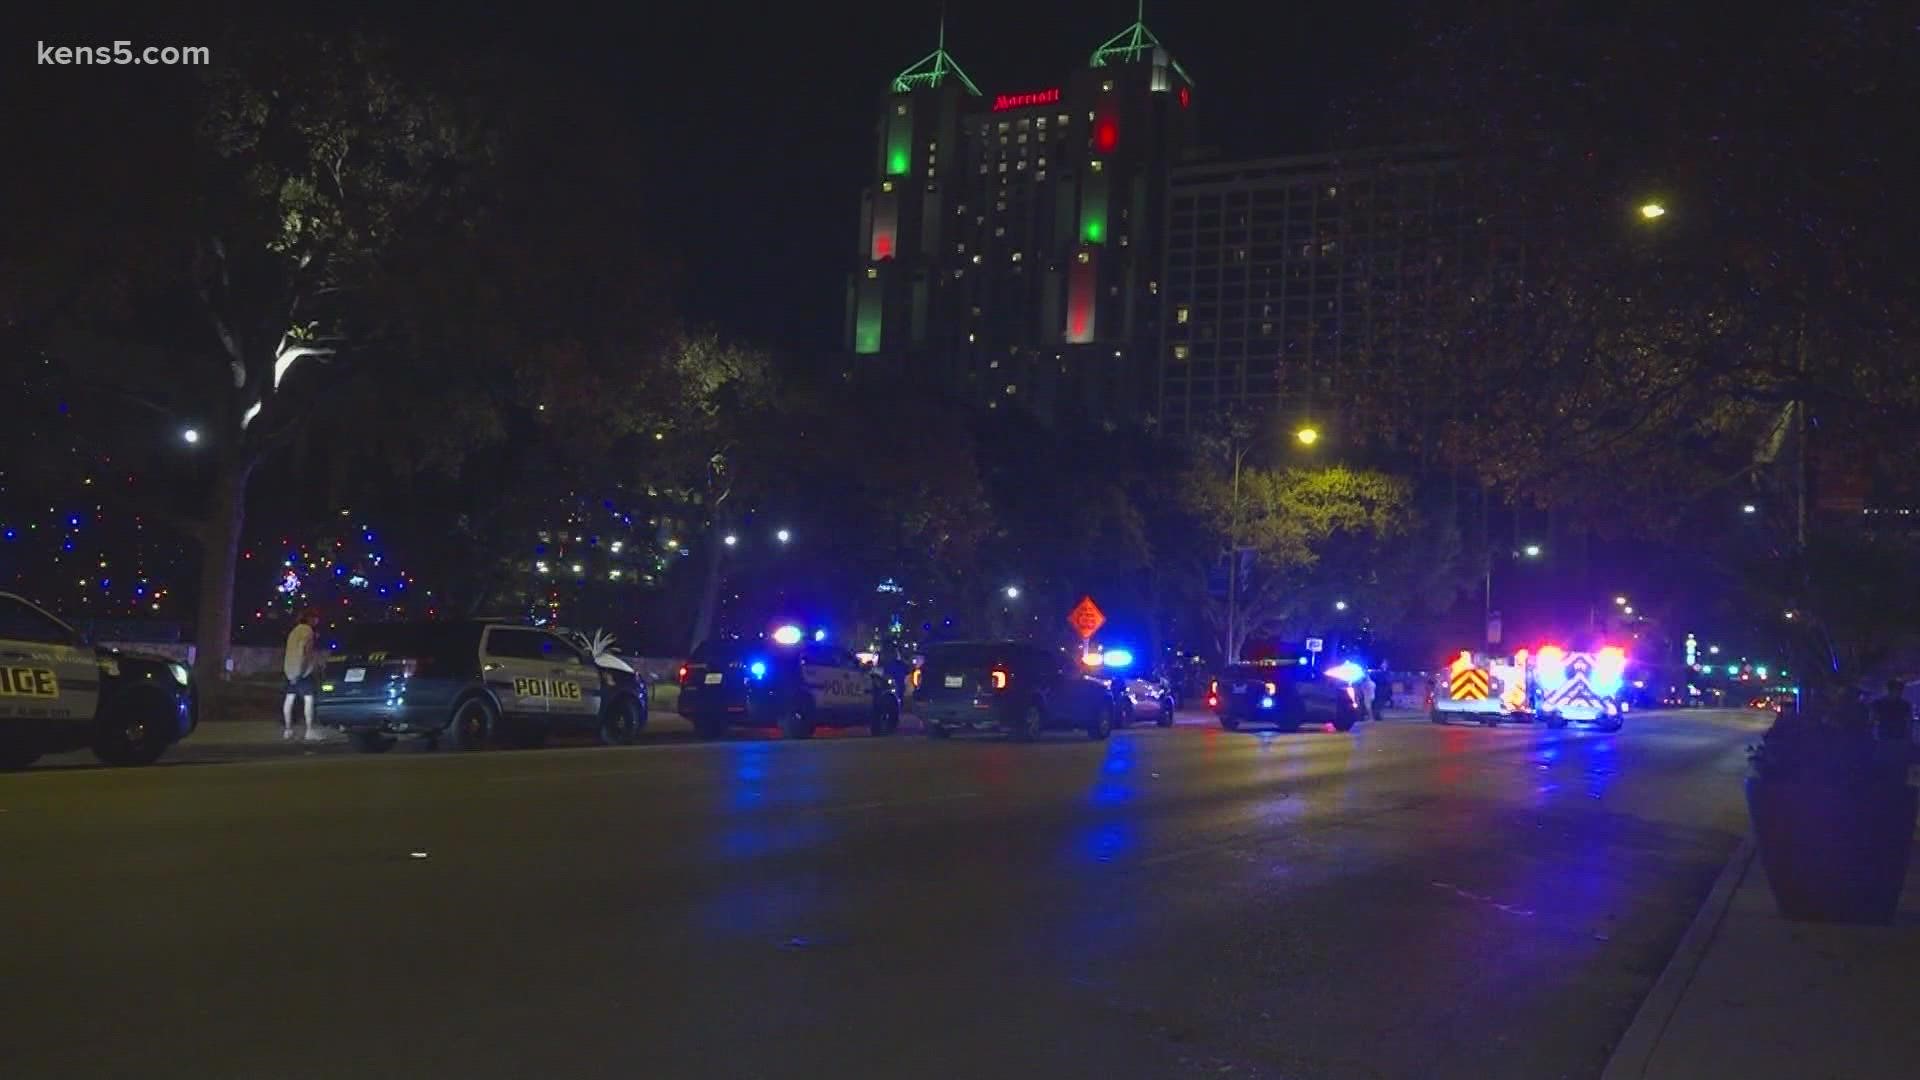 Officers responded to a call for a shooting around 12:30 a.m. at Market Street and Alamo Street in downtown San Antonio.